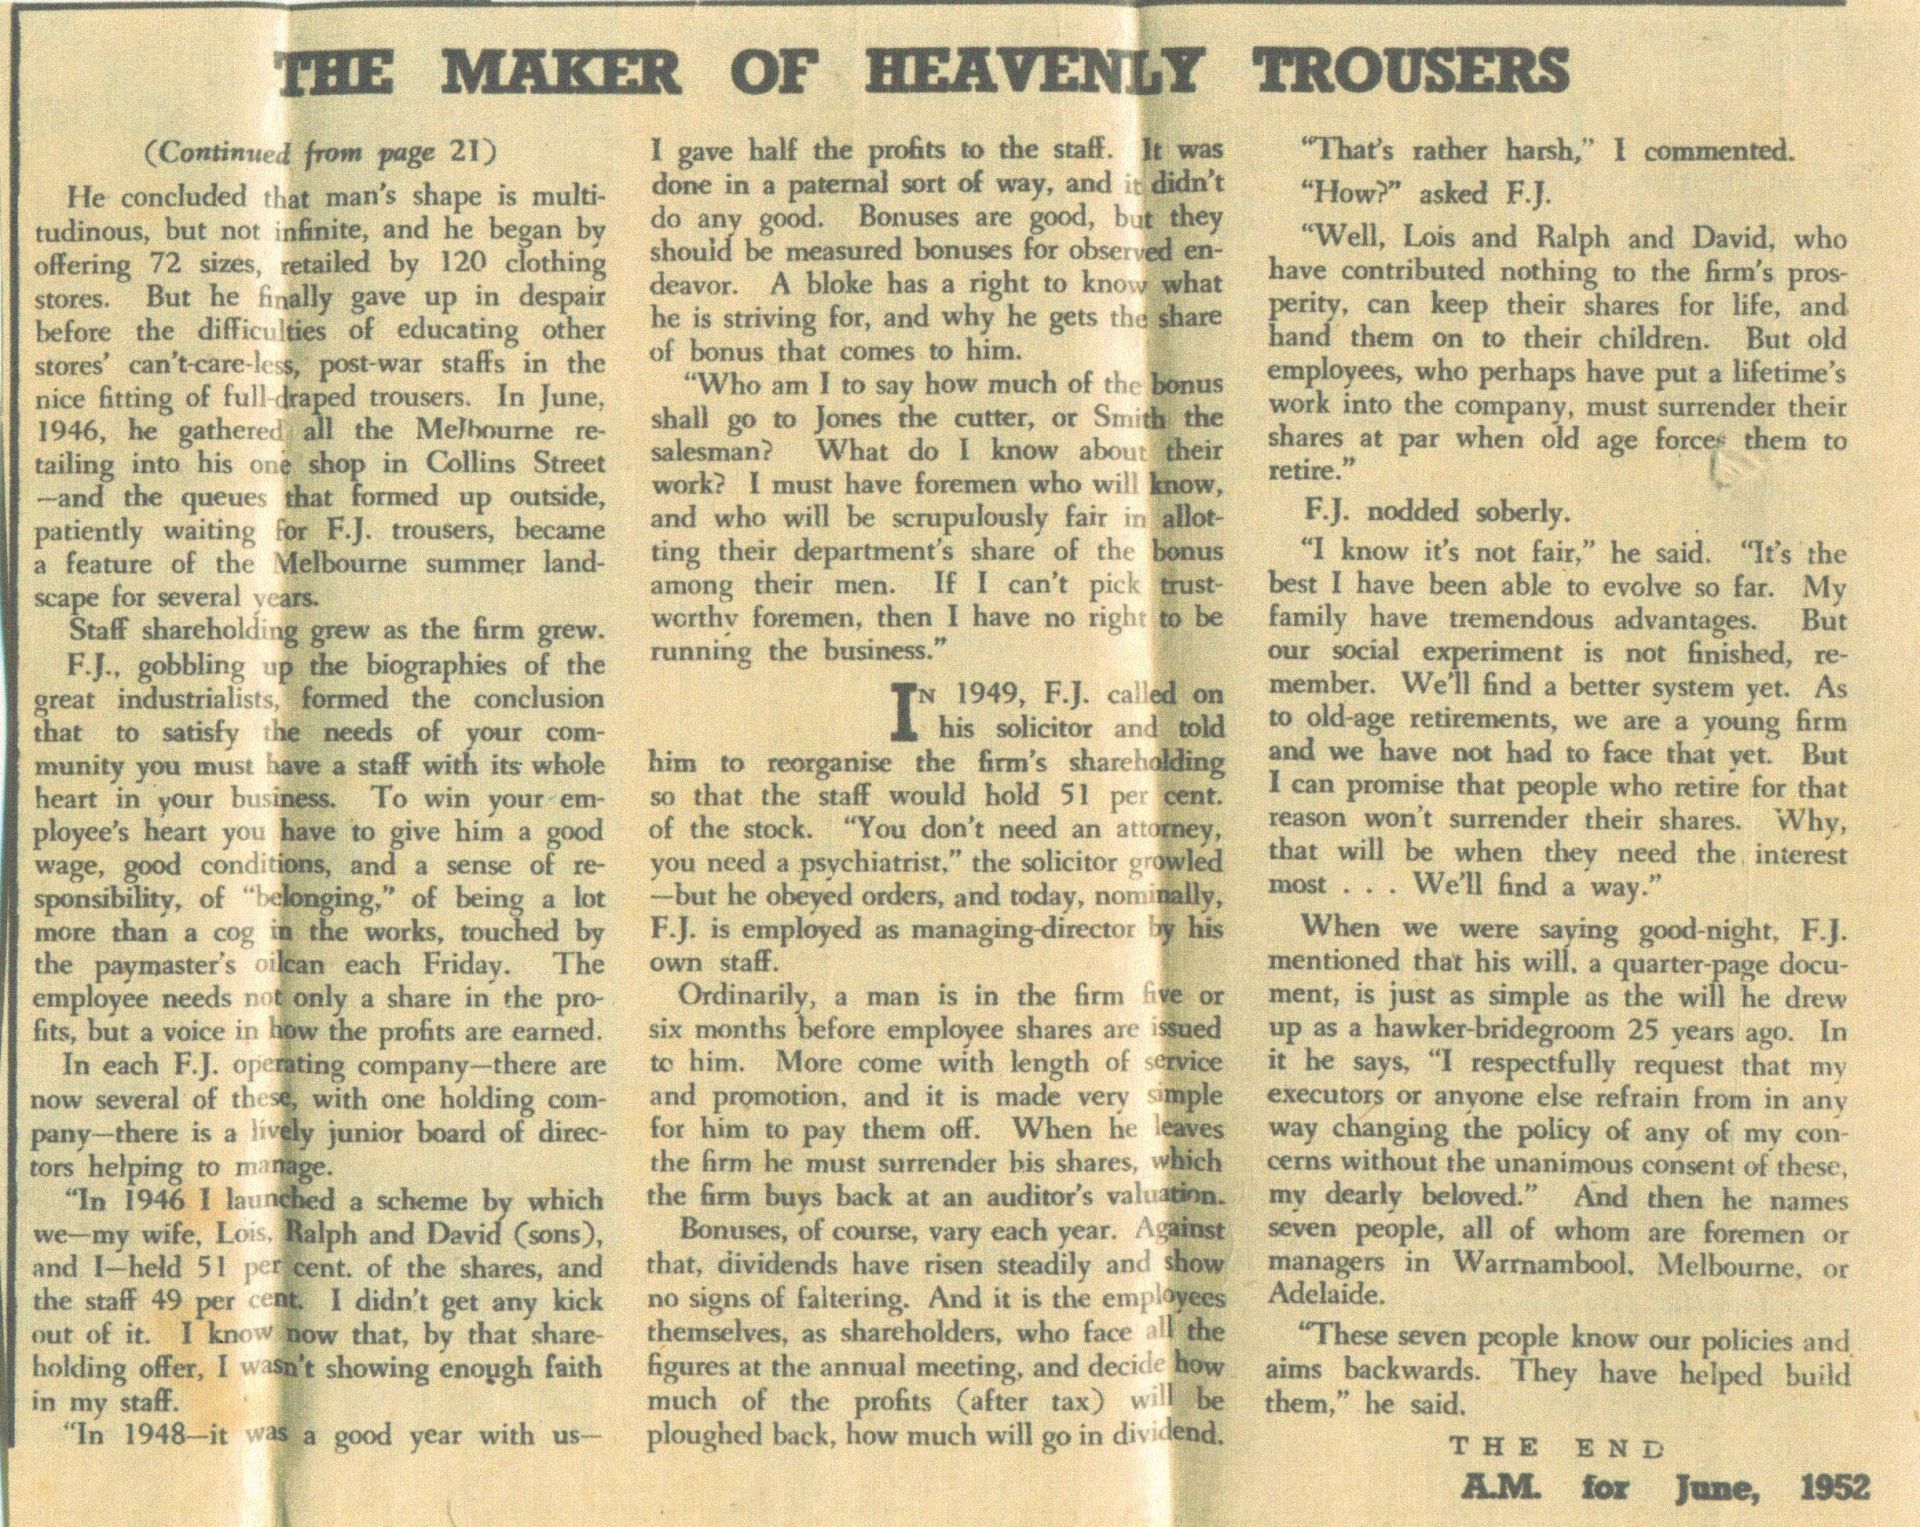 A very interesting read on FJs profit sharing philosophy from a longer article 'The Maker of Heavenly Trousers' written by Dick Merryweather in 1952.  